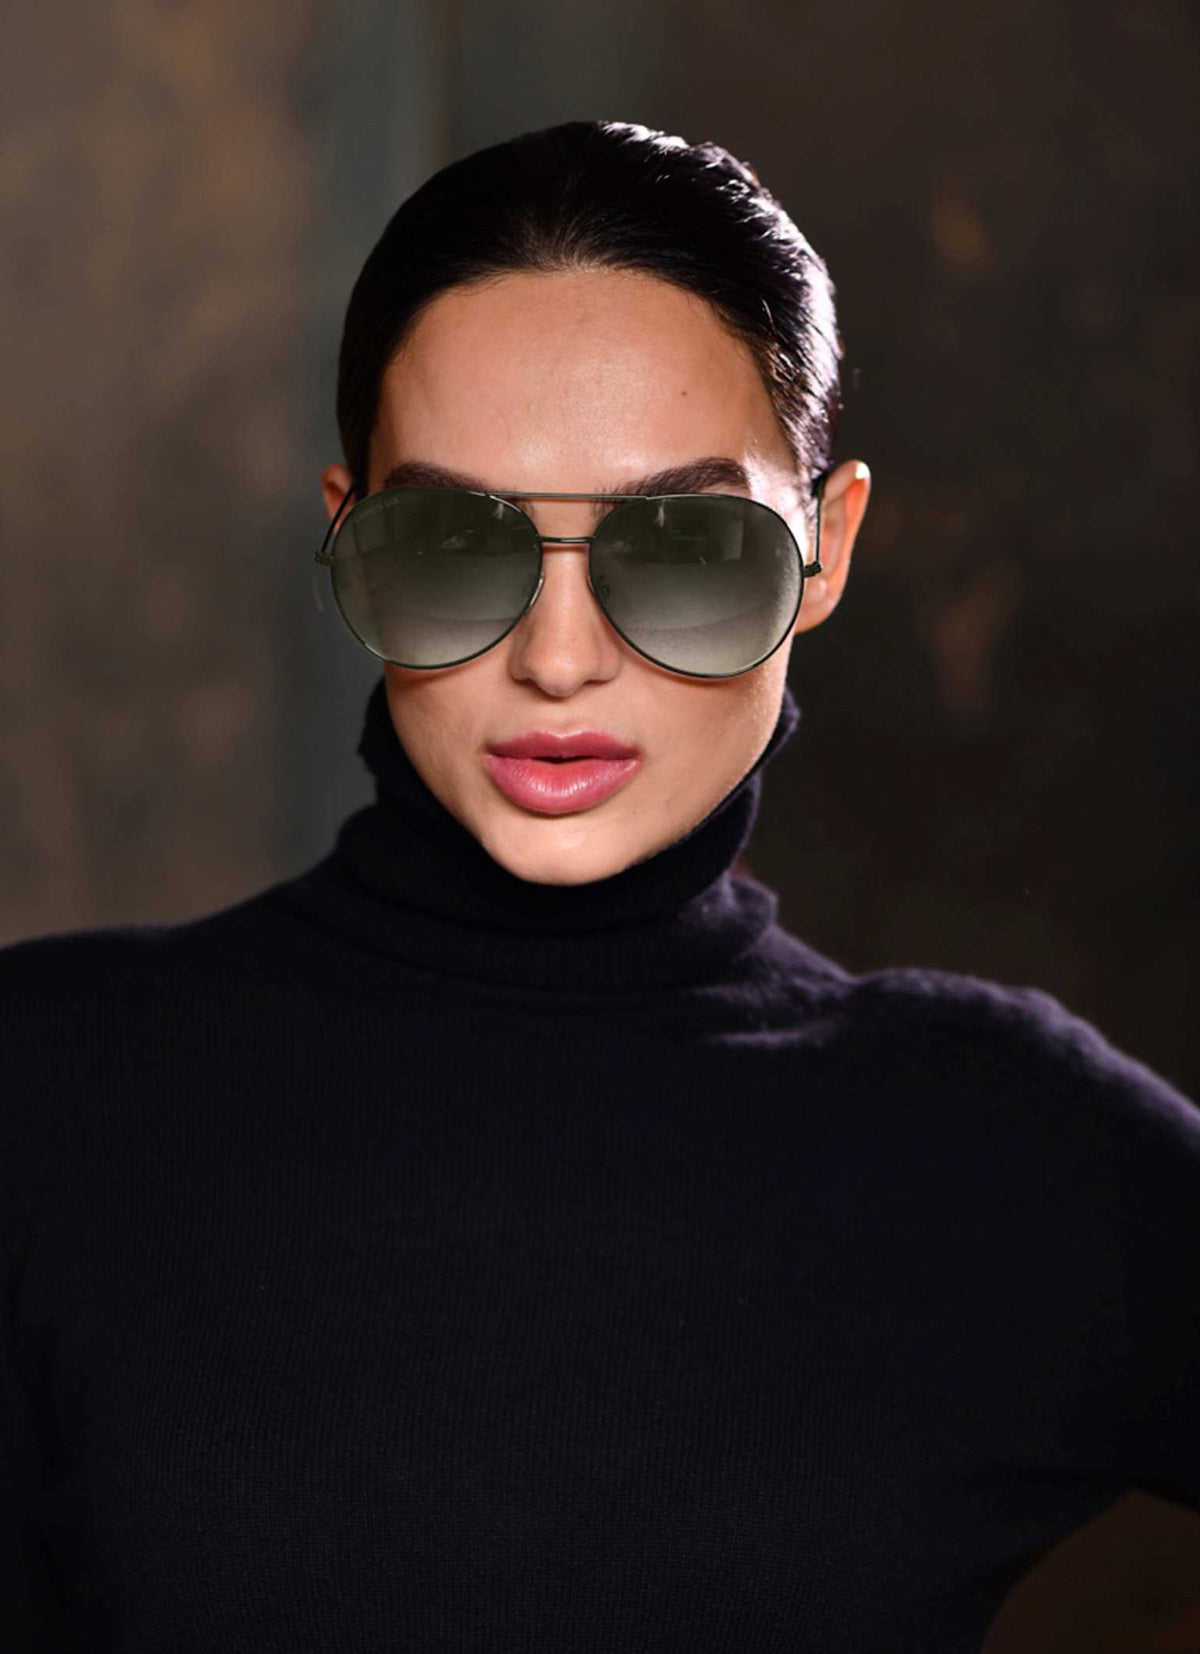 Beautiful girl wearing a pair of olive green aviator sunglasses and black turtle neck pure cashmere sweater